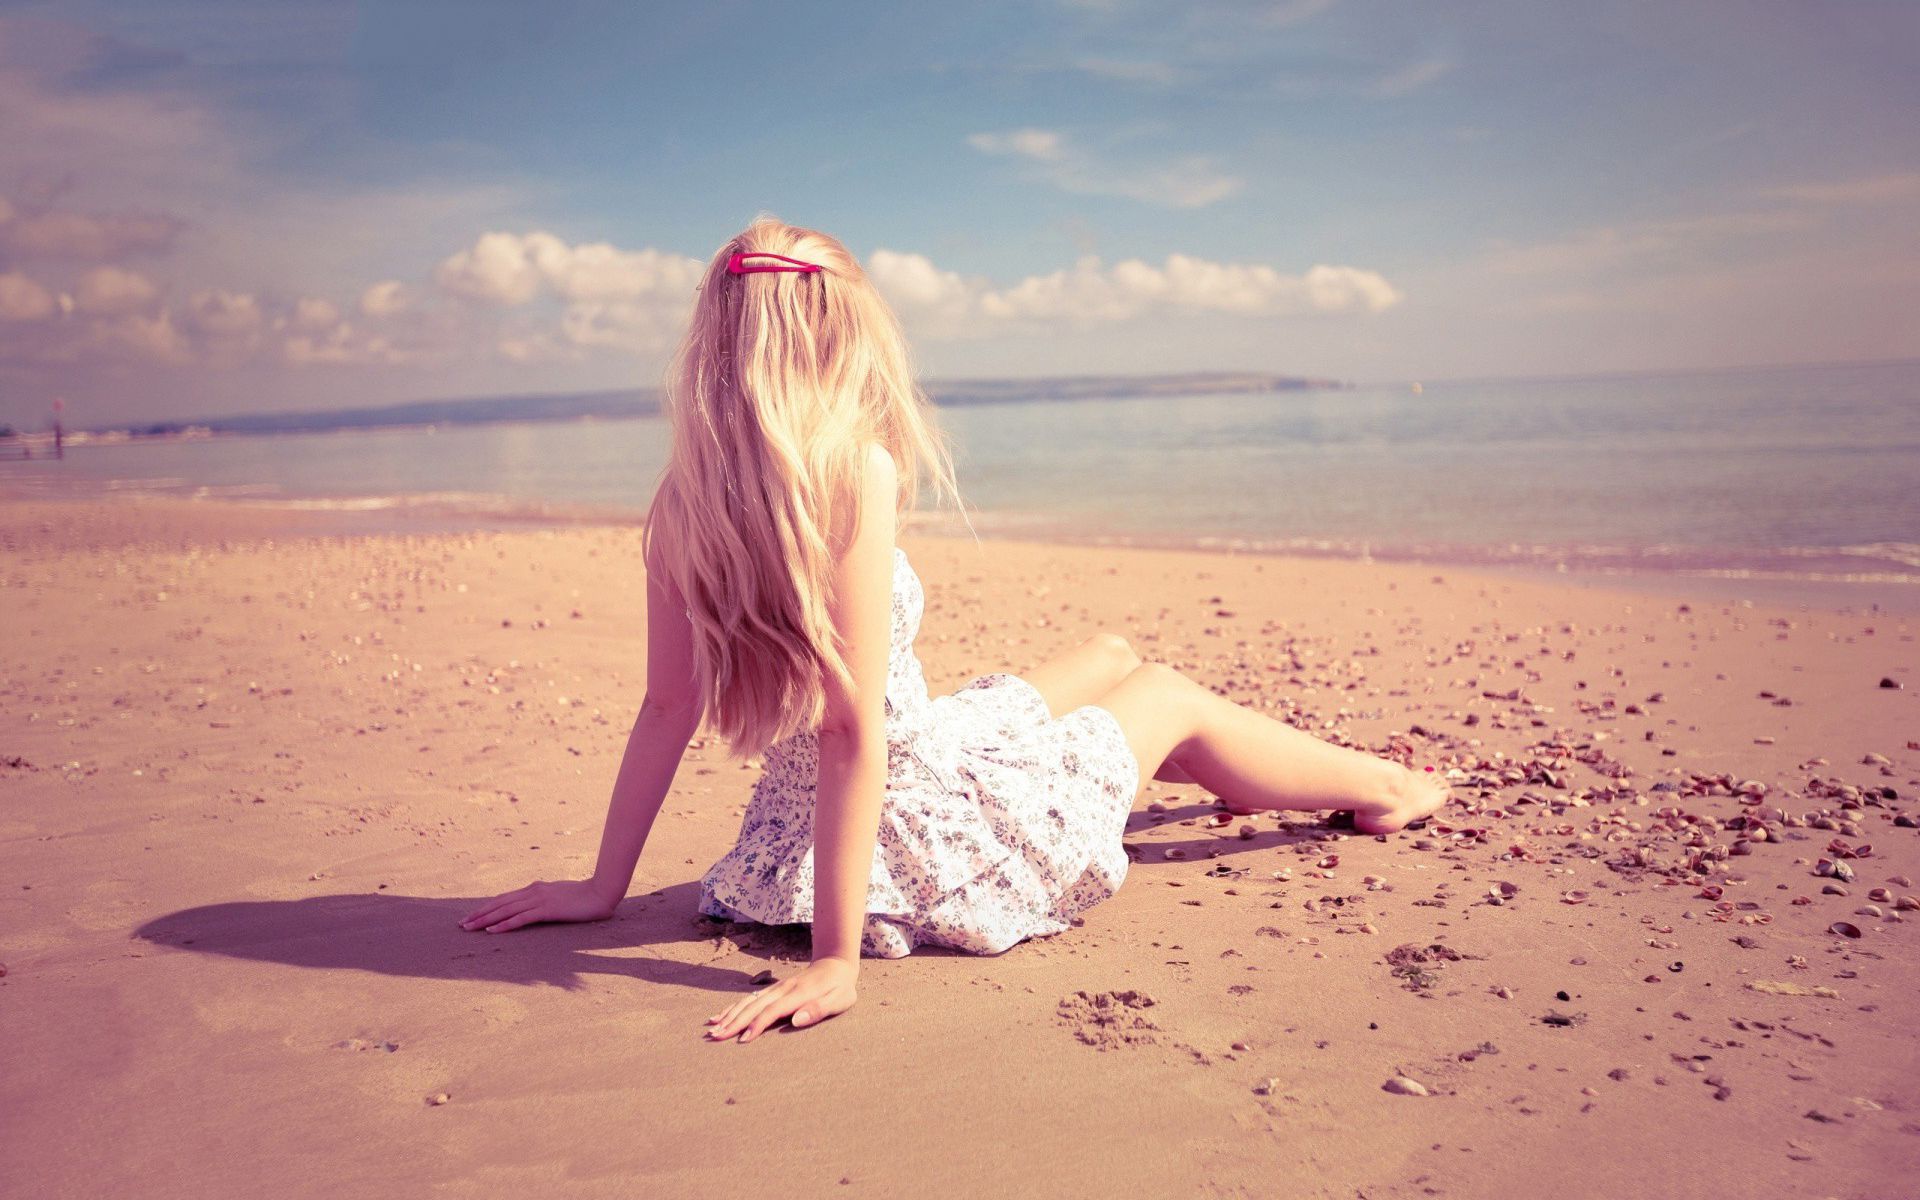 HD wallpaper, Sitting, Lonely, Beach, Girl, On